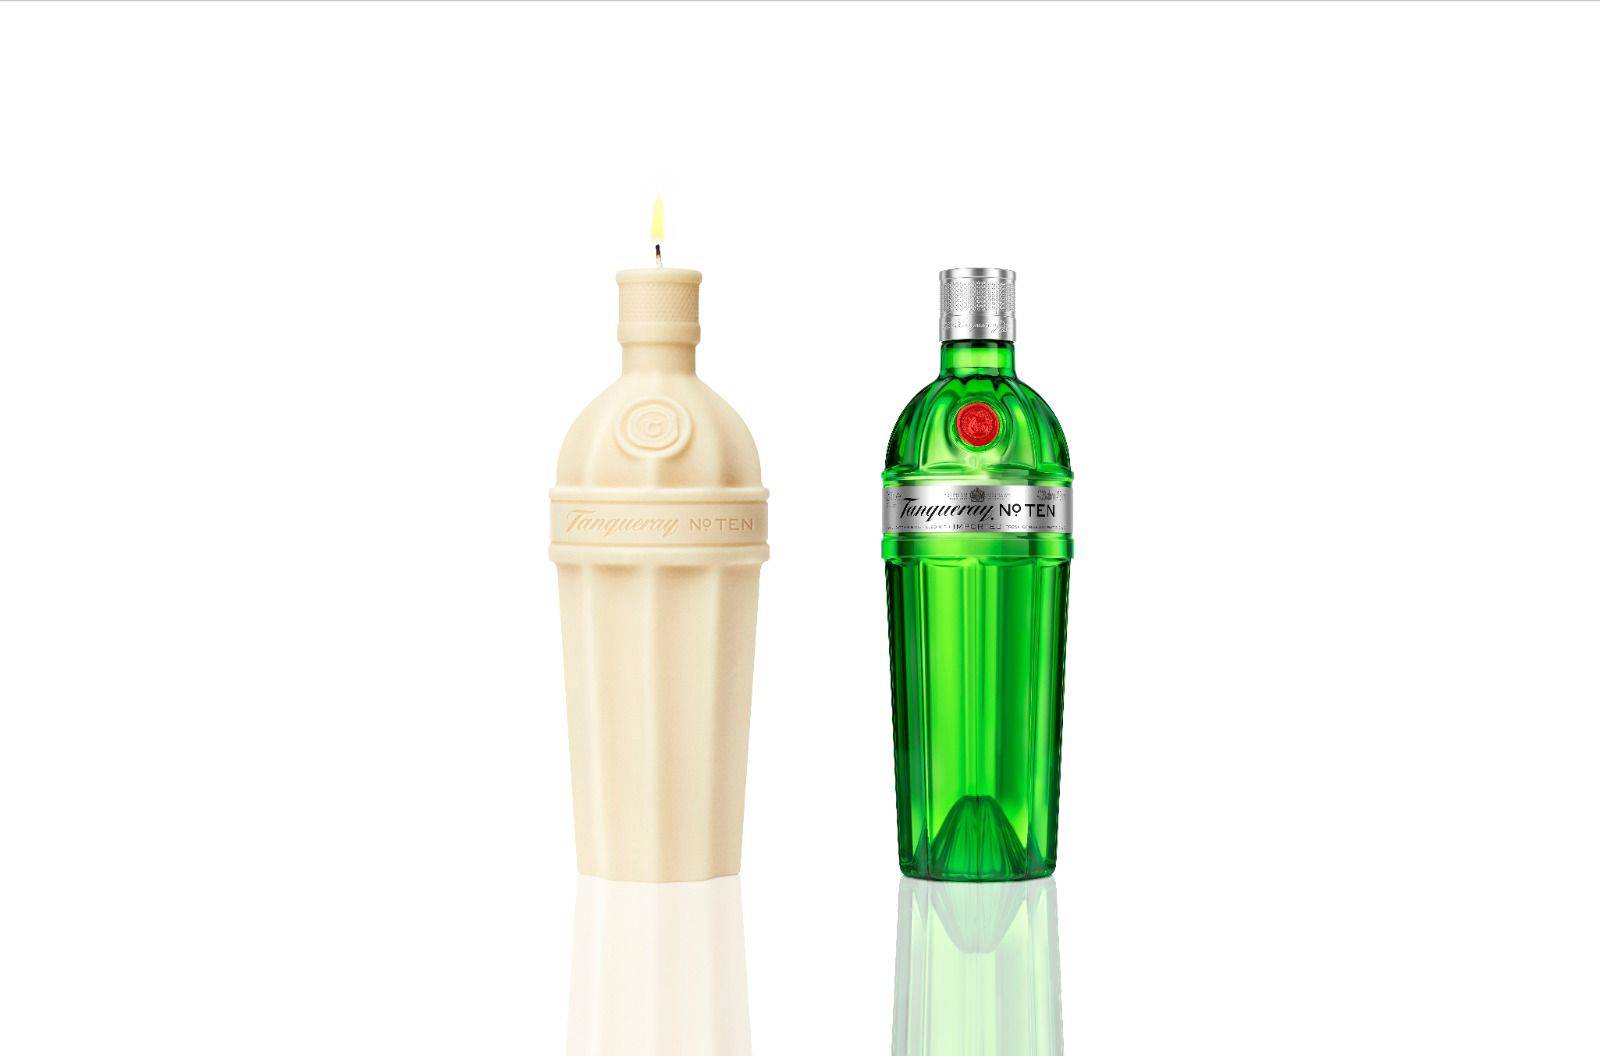 centldn tangqueray candle with bottle